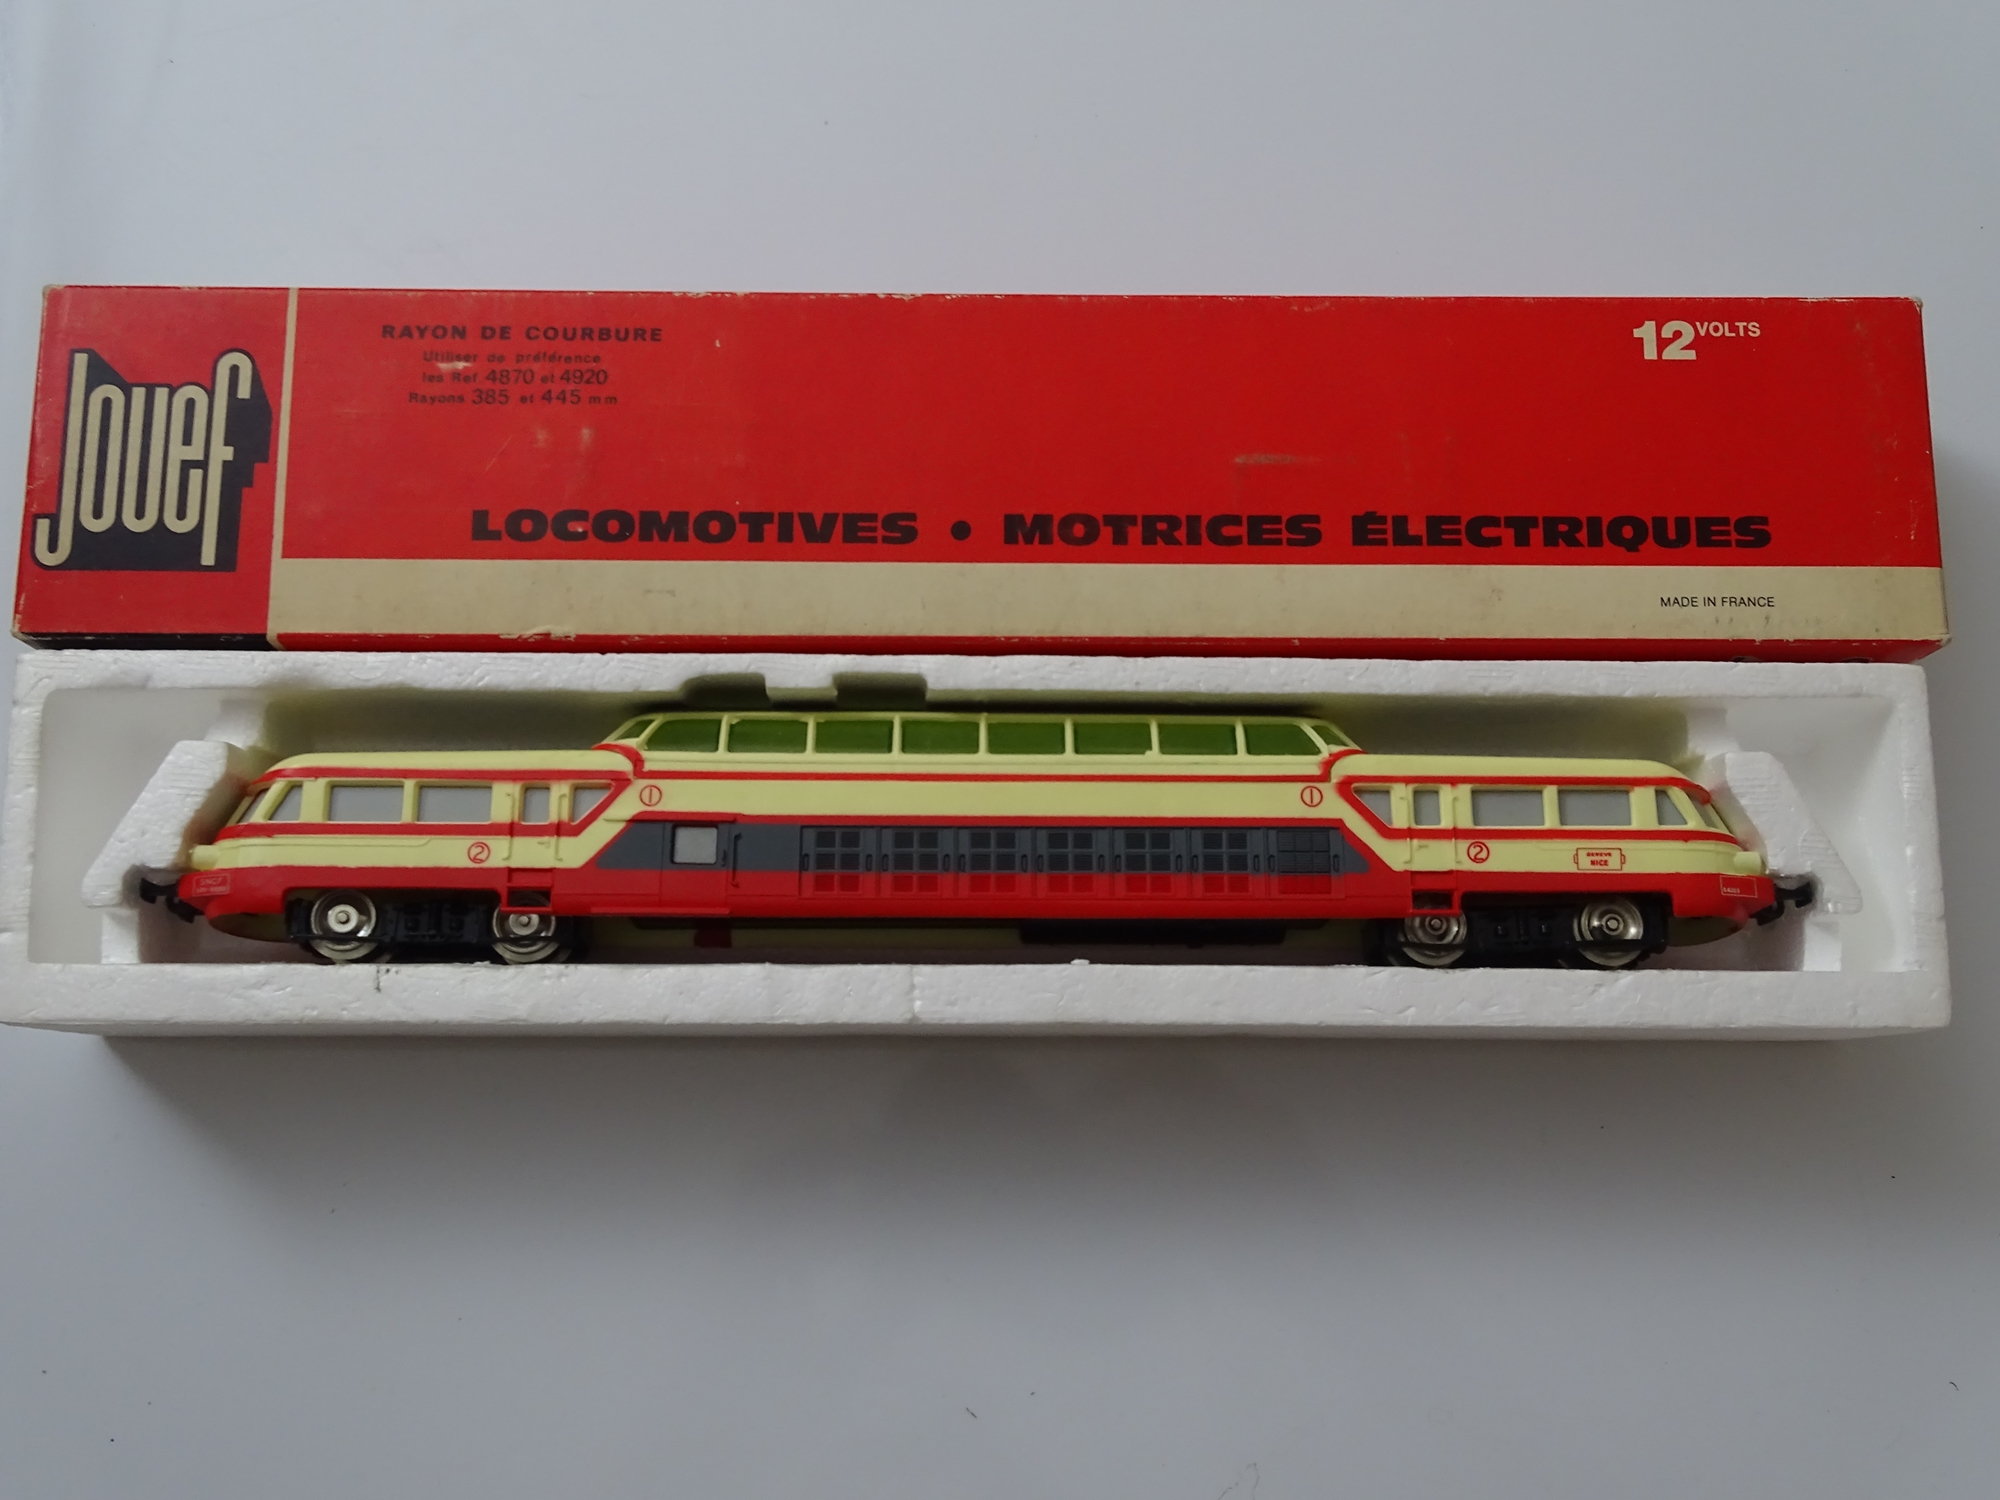 HO GAUGE MODEL RAILWAYS: A JOEUF French Outline Autorail Panoramique Railcar - G/VG in G box